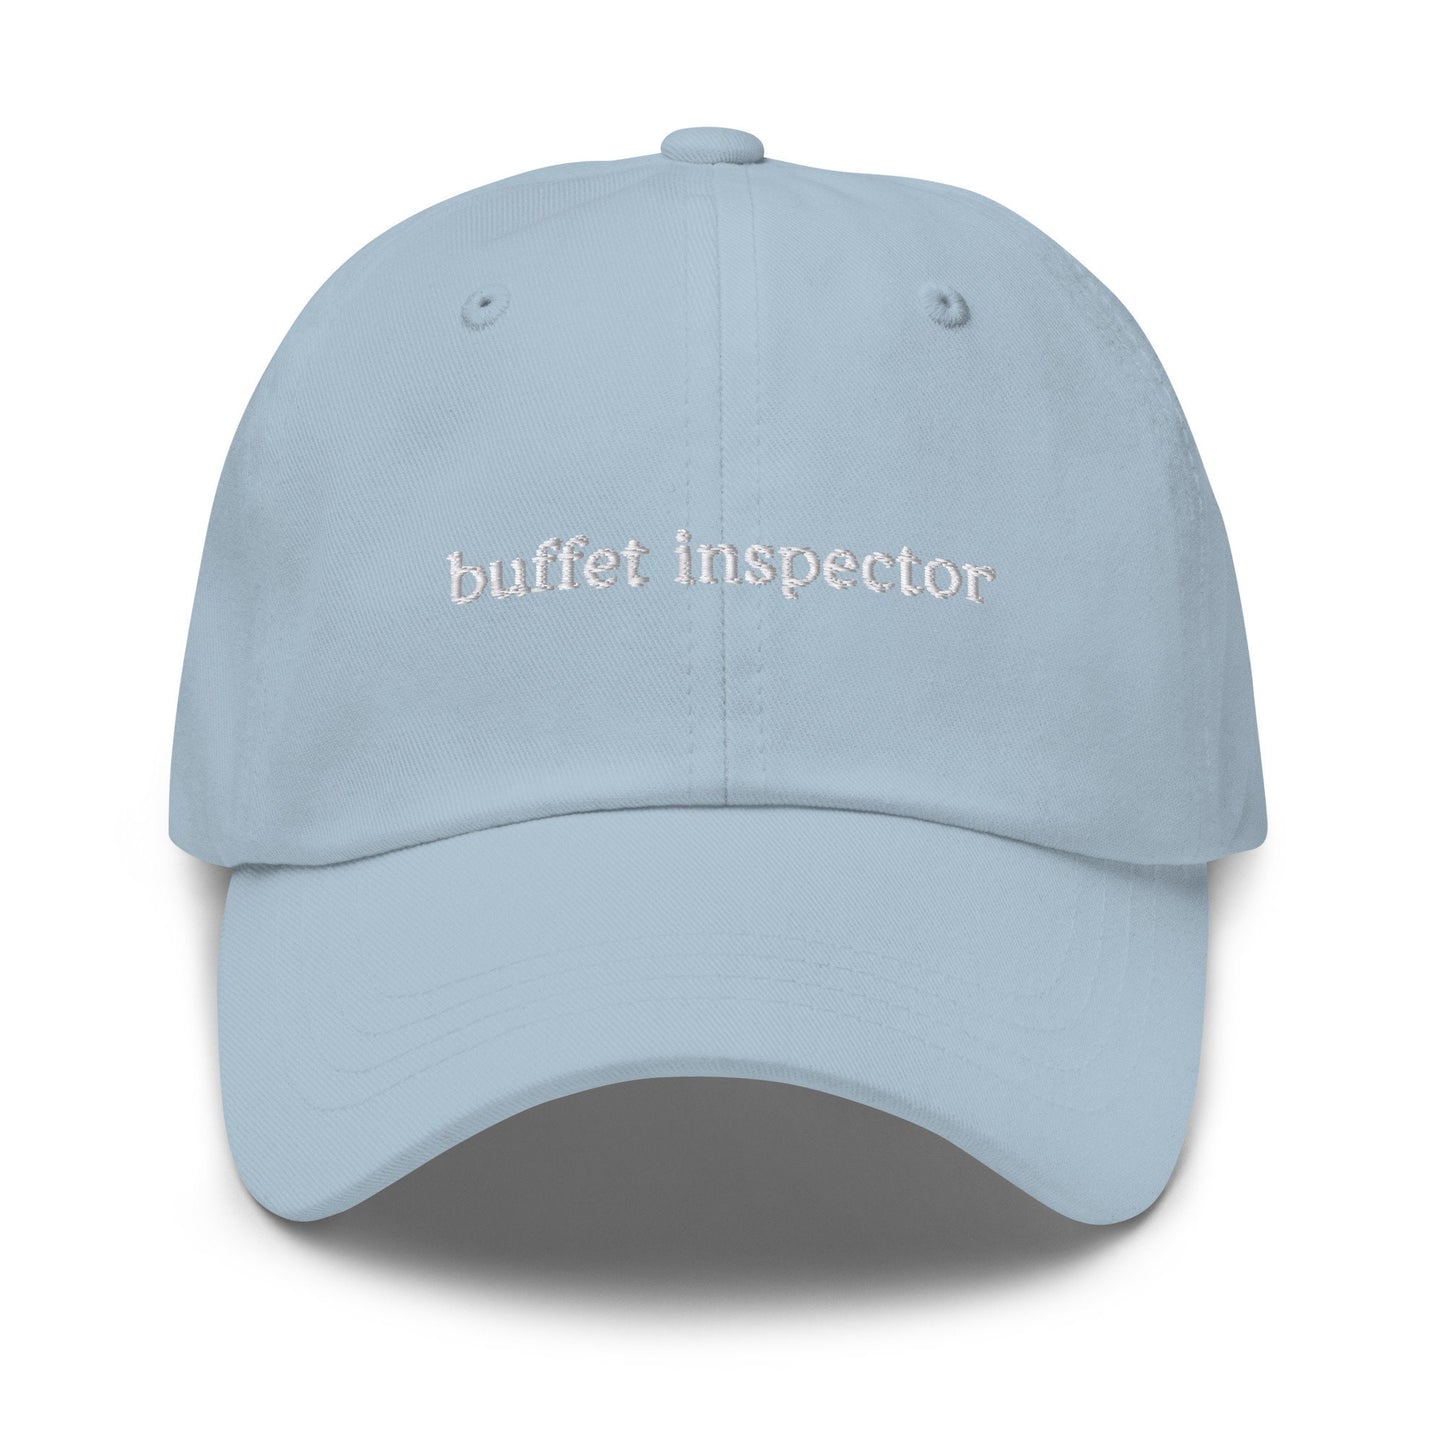 Buffet Inspector Hat - For Big Eaters and Foodies - Multiple Colors - Cotton Embroidered Baseball Cap